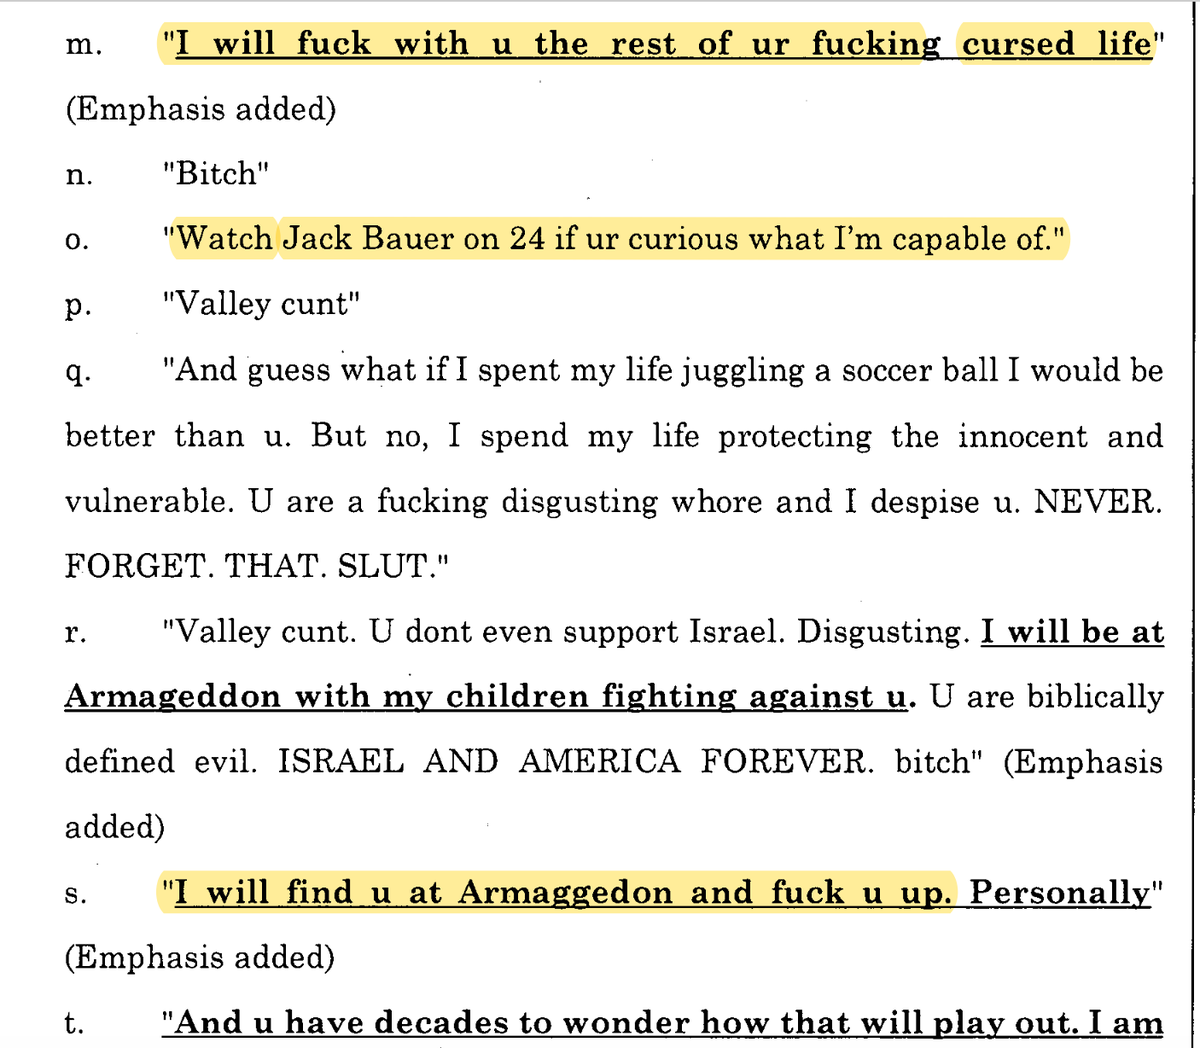 For the past few weeks I've been looking into Kyle Rittenhouse's attorneys. Last year, one of them, John Pierce, allegedly sent his ex-wife dozens of texts laced with violent threats. "I will hunt u down," he allegedly wrote. Here are more of the texts, via court documents: